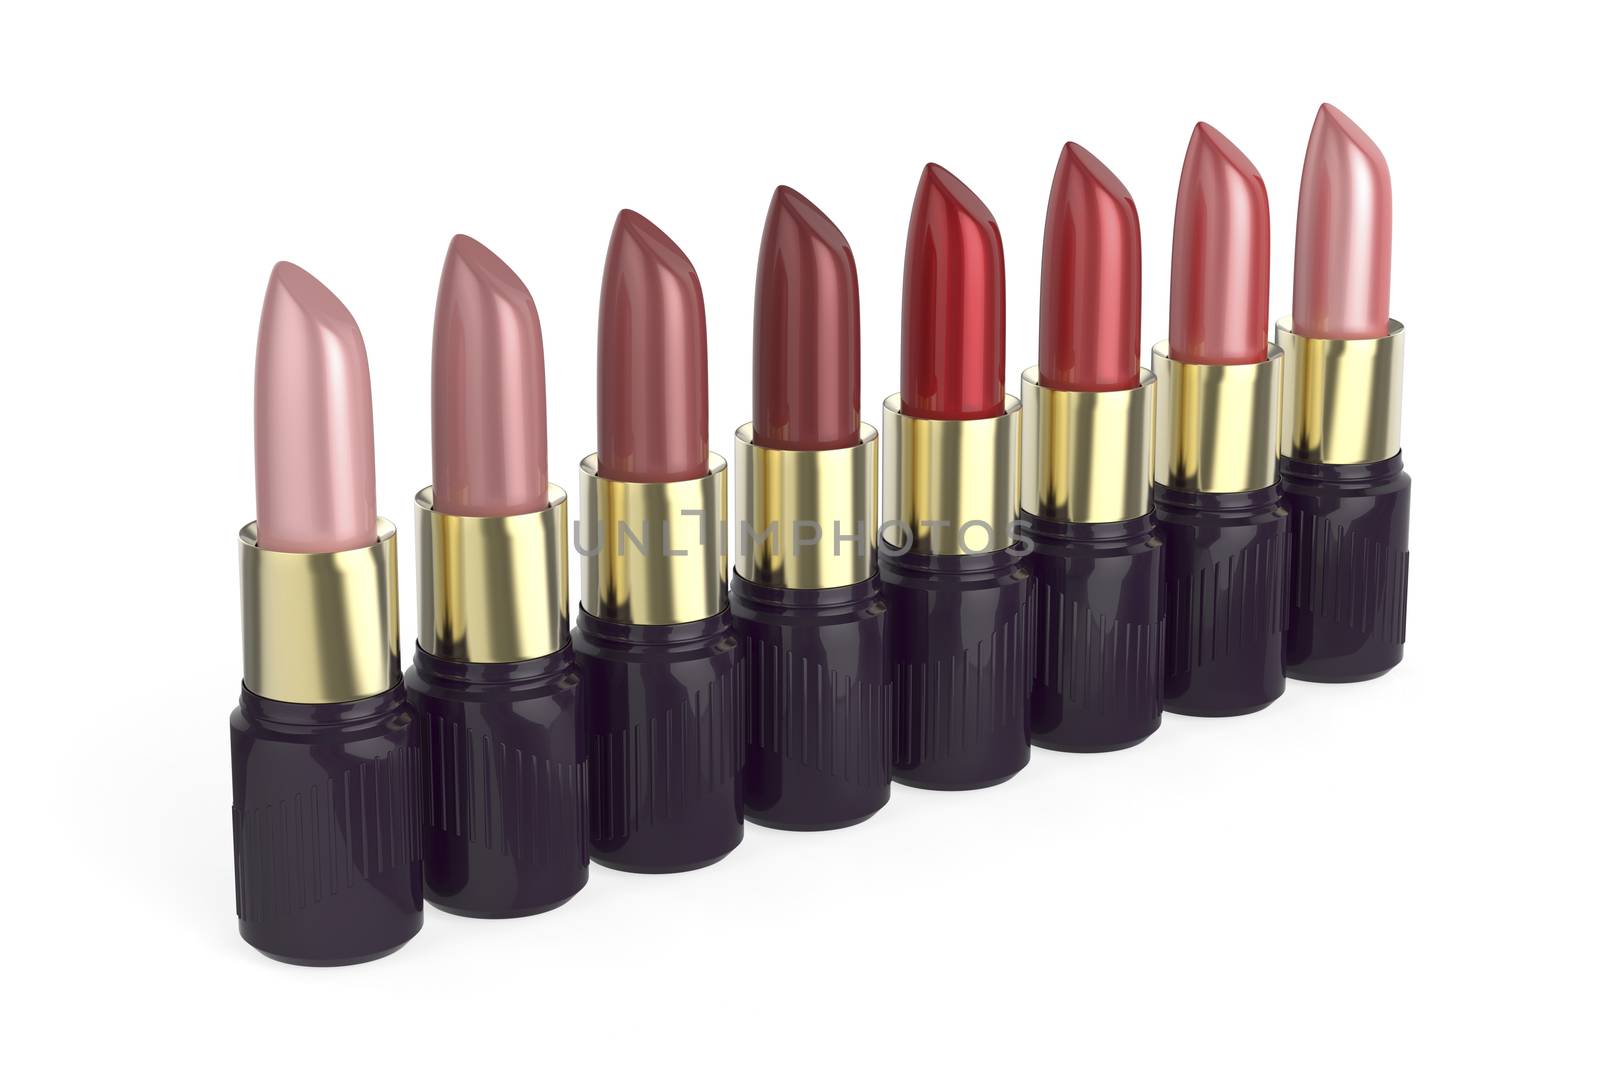 Lipsticks by magraphics